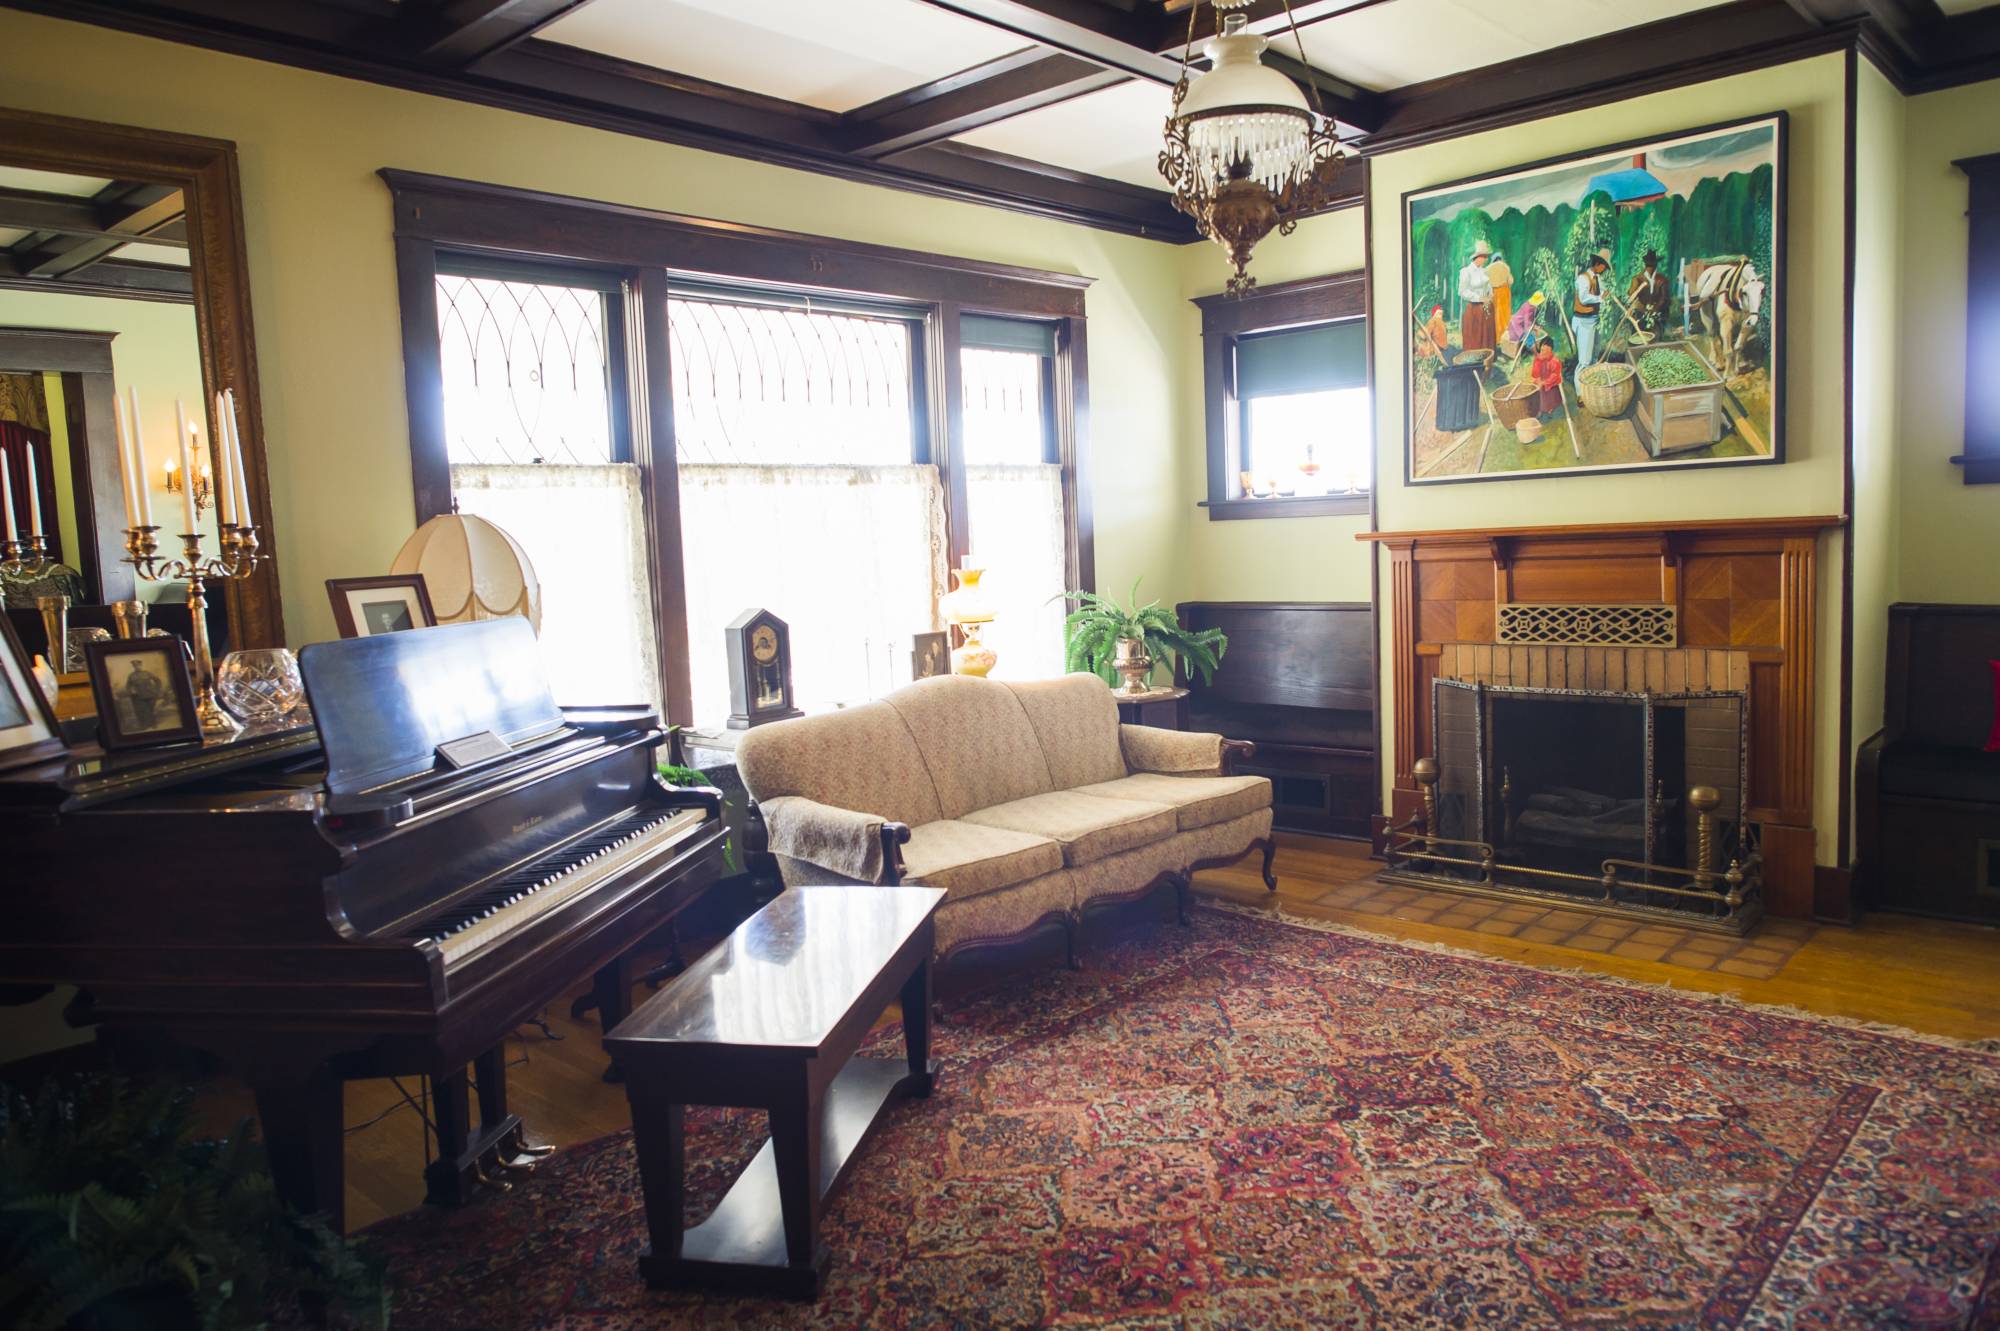 Photo of period living room at the Greater Kent Historical Society Museum in Kent, Washington